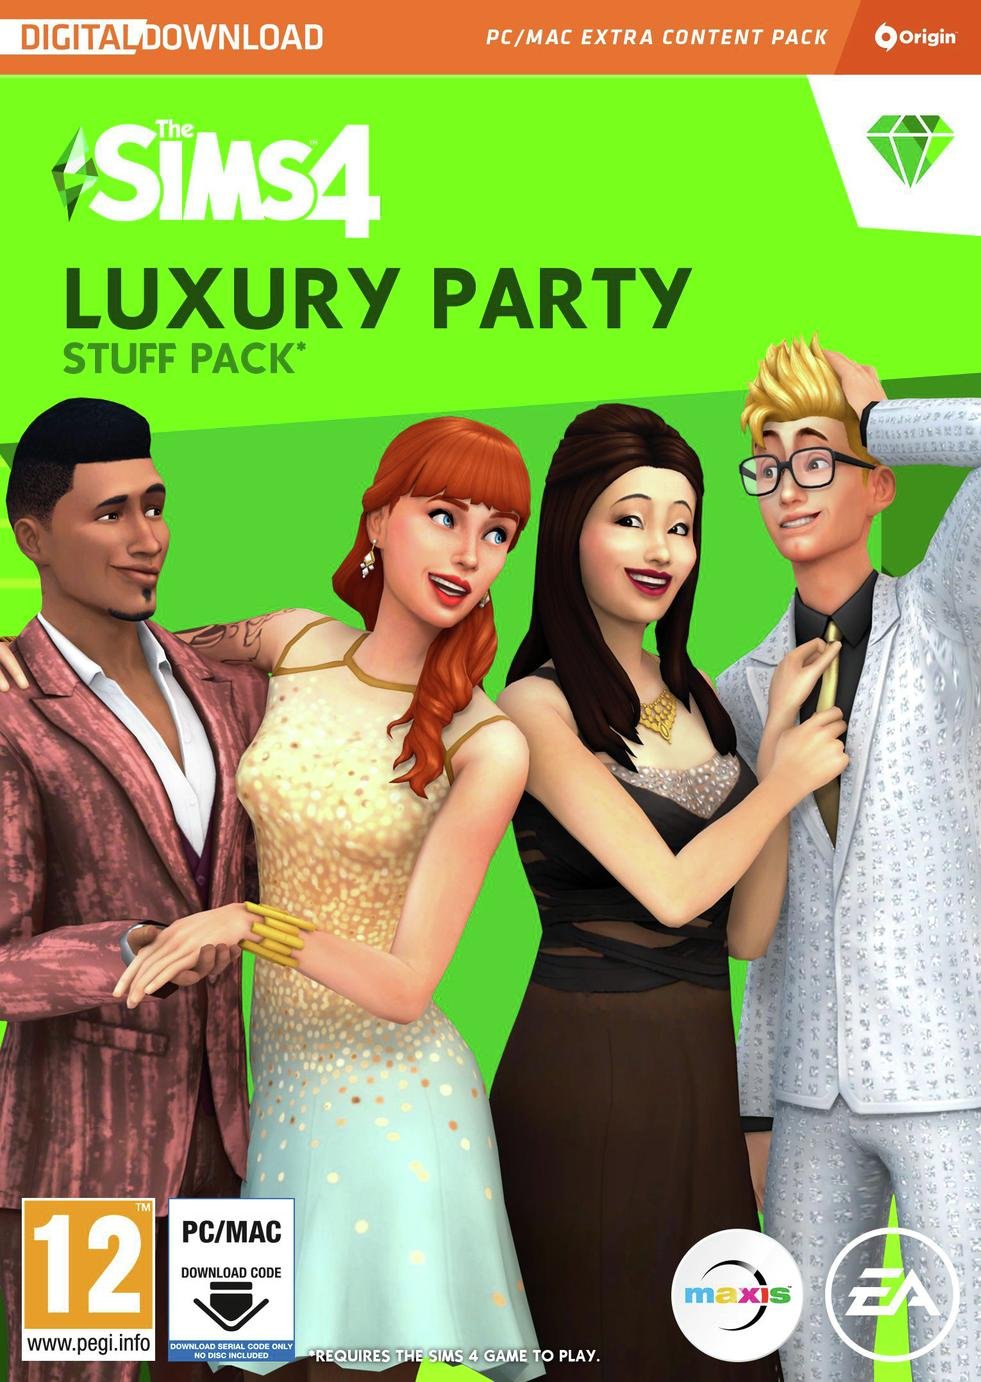 The Sims 4 Luxury Party Stuff Pack PC Game